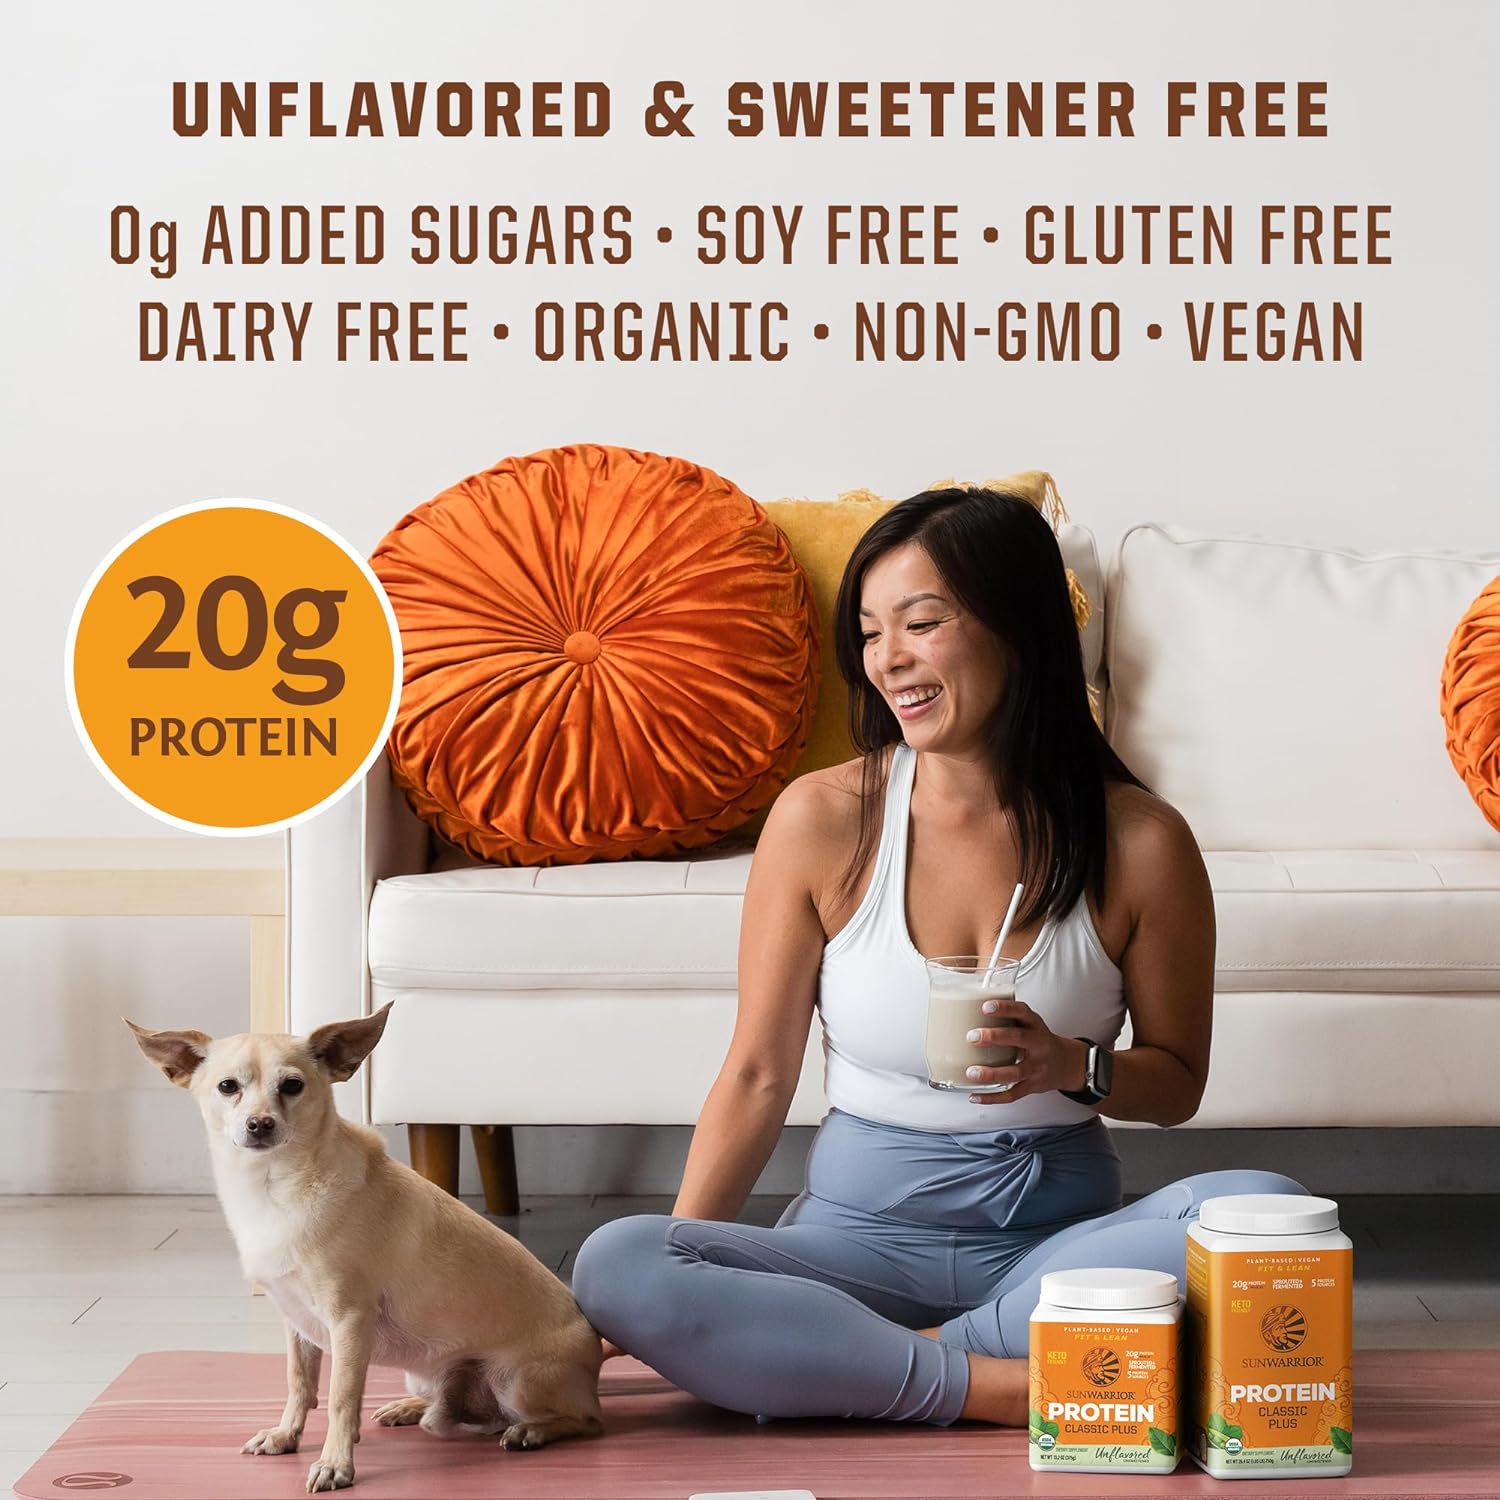 Vegan Organic Protein Powder Plant-based | 5 Superfood Quinoa Chia Seed Soy Free Dairy Free Gluten Free Synthetic Free NON-GMO | Unflavored 30 Servings | Classic Plus by Sunwarrior : Health & Household